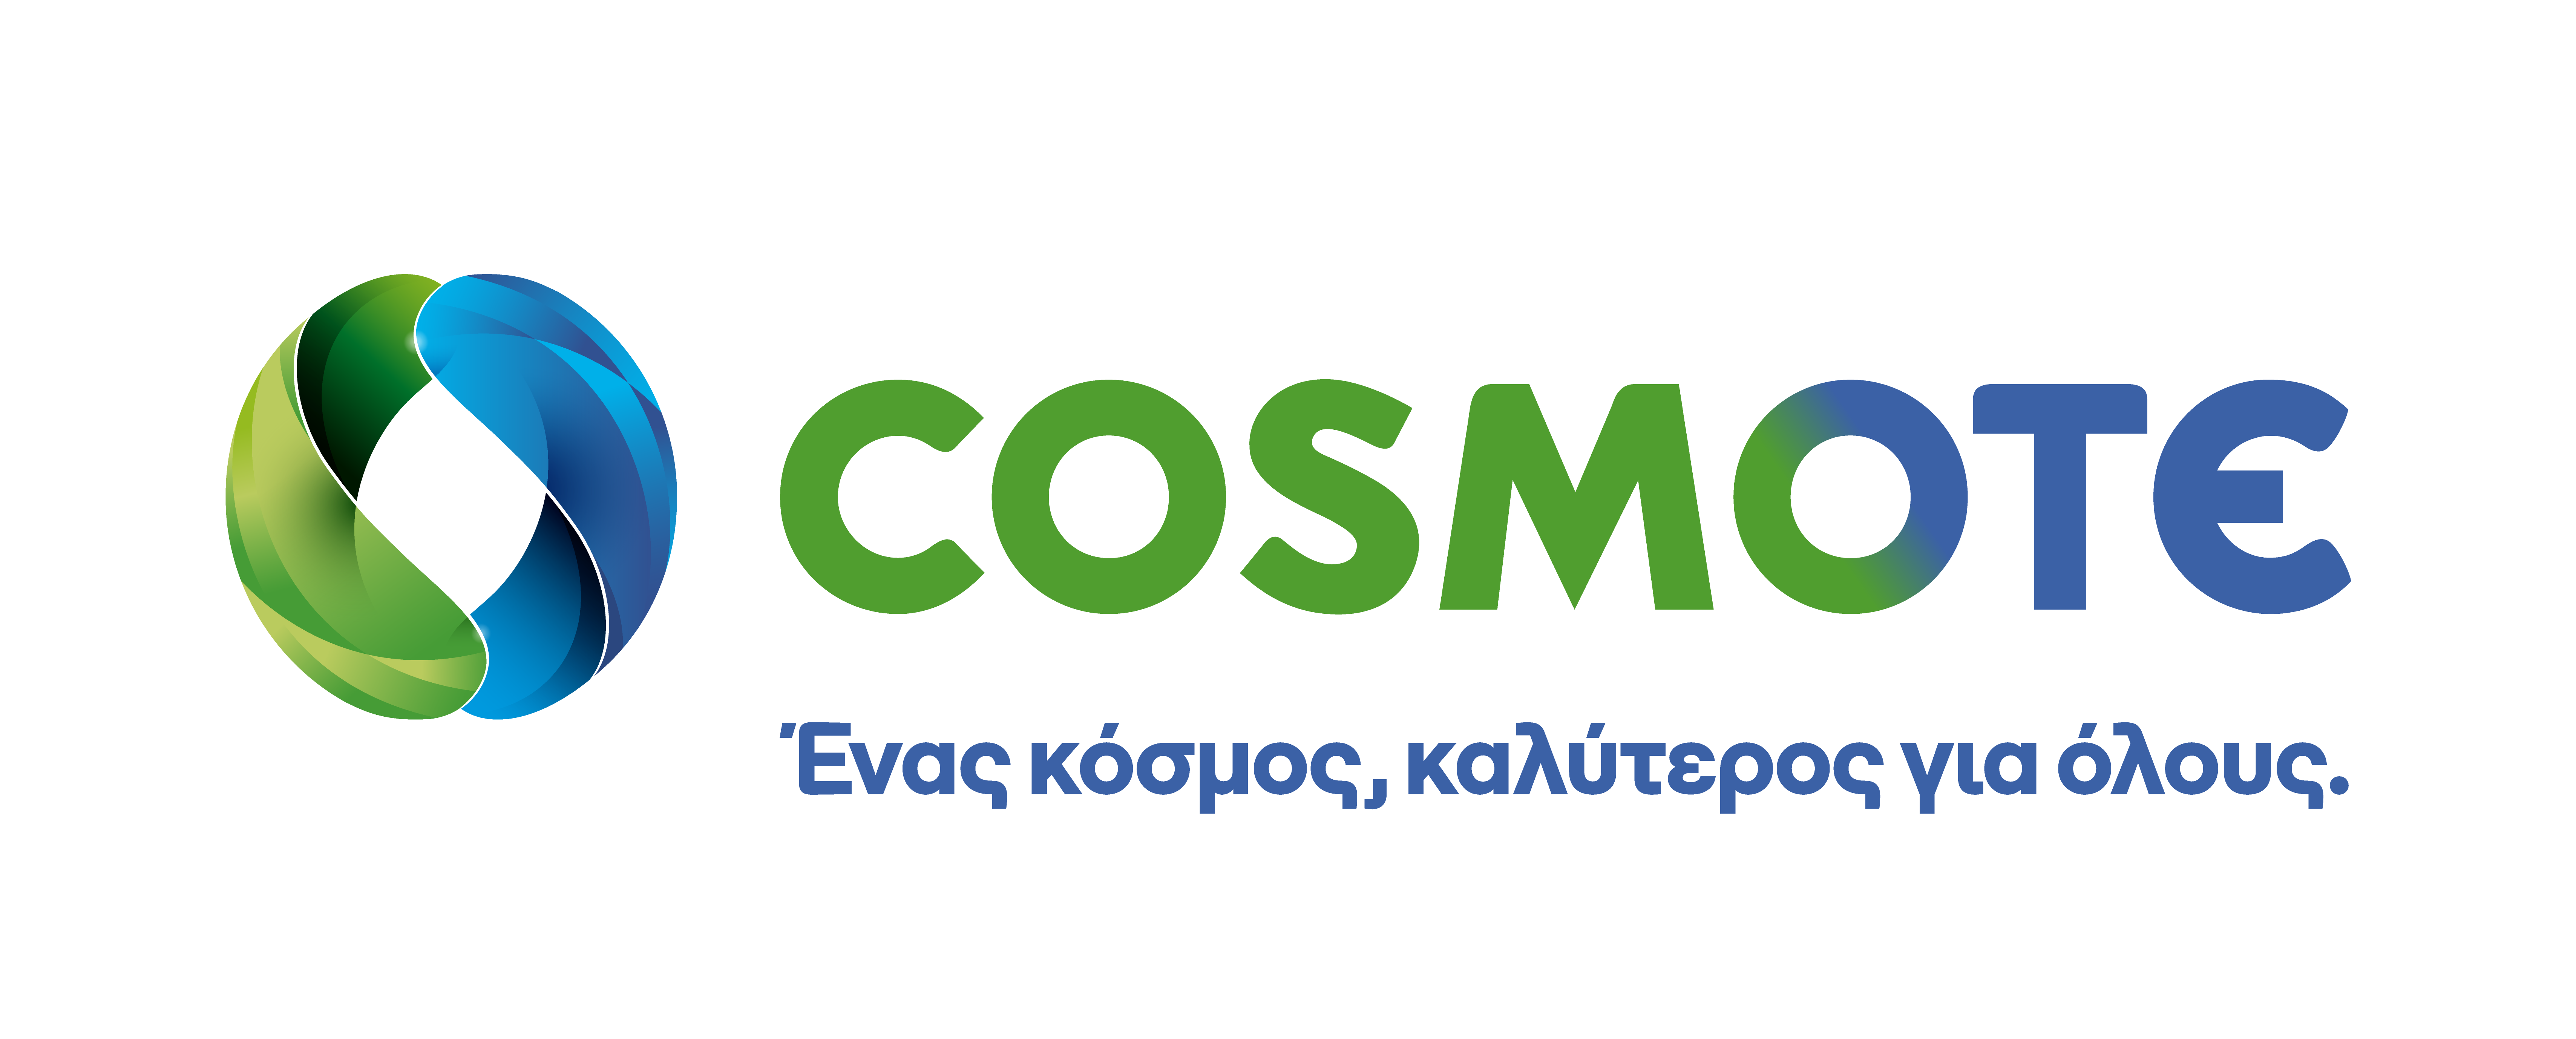 cosmote-logo-gr.png